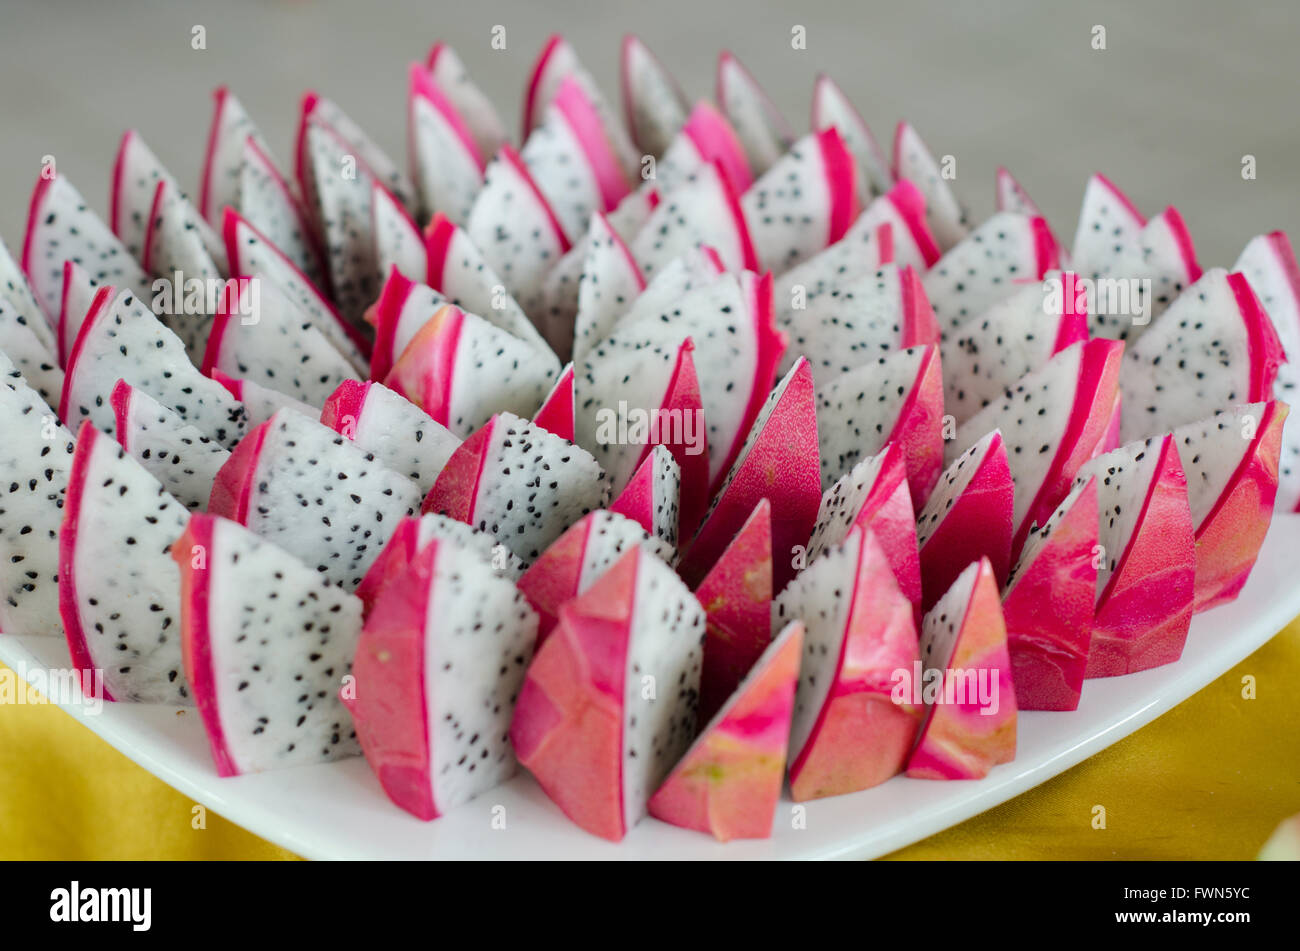 Slice of dragon fruit on a plate Stock Photo